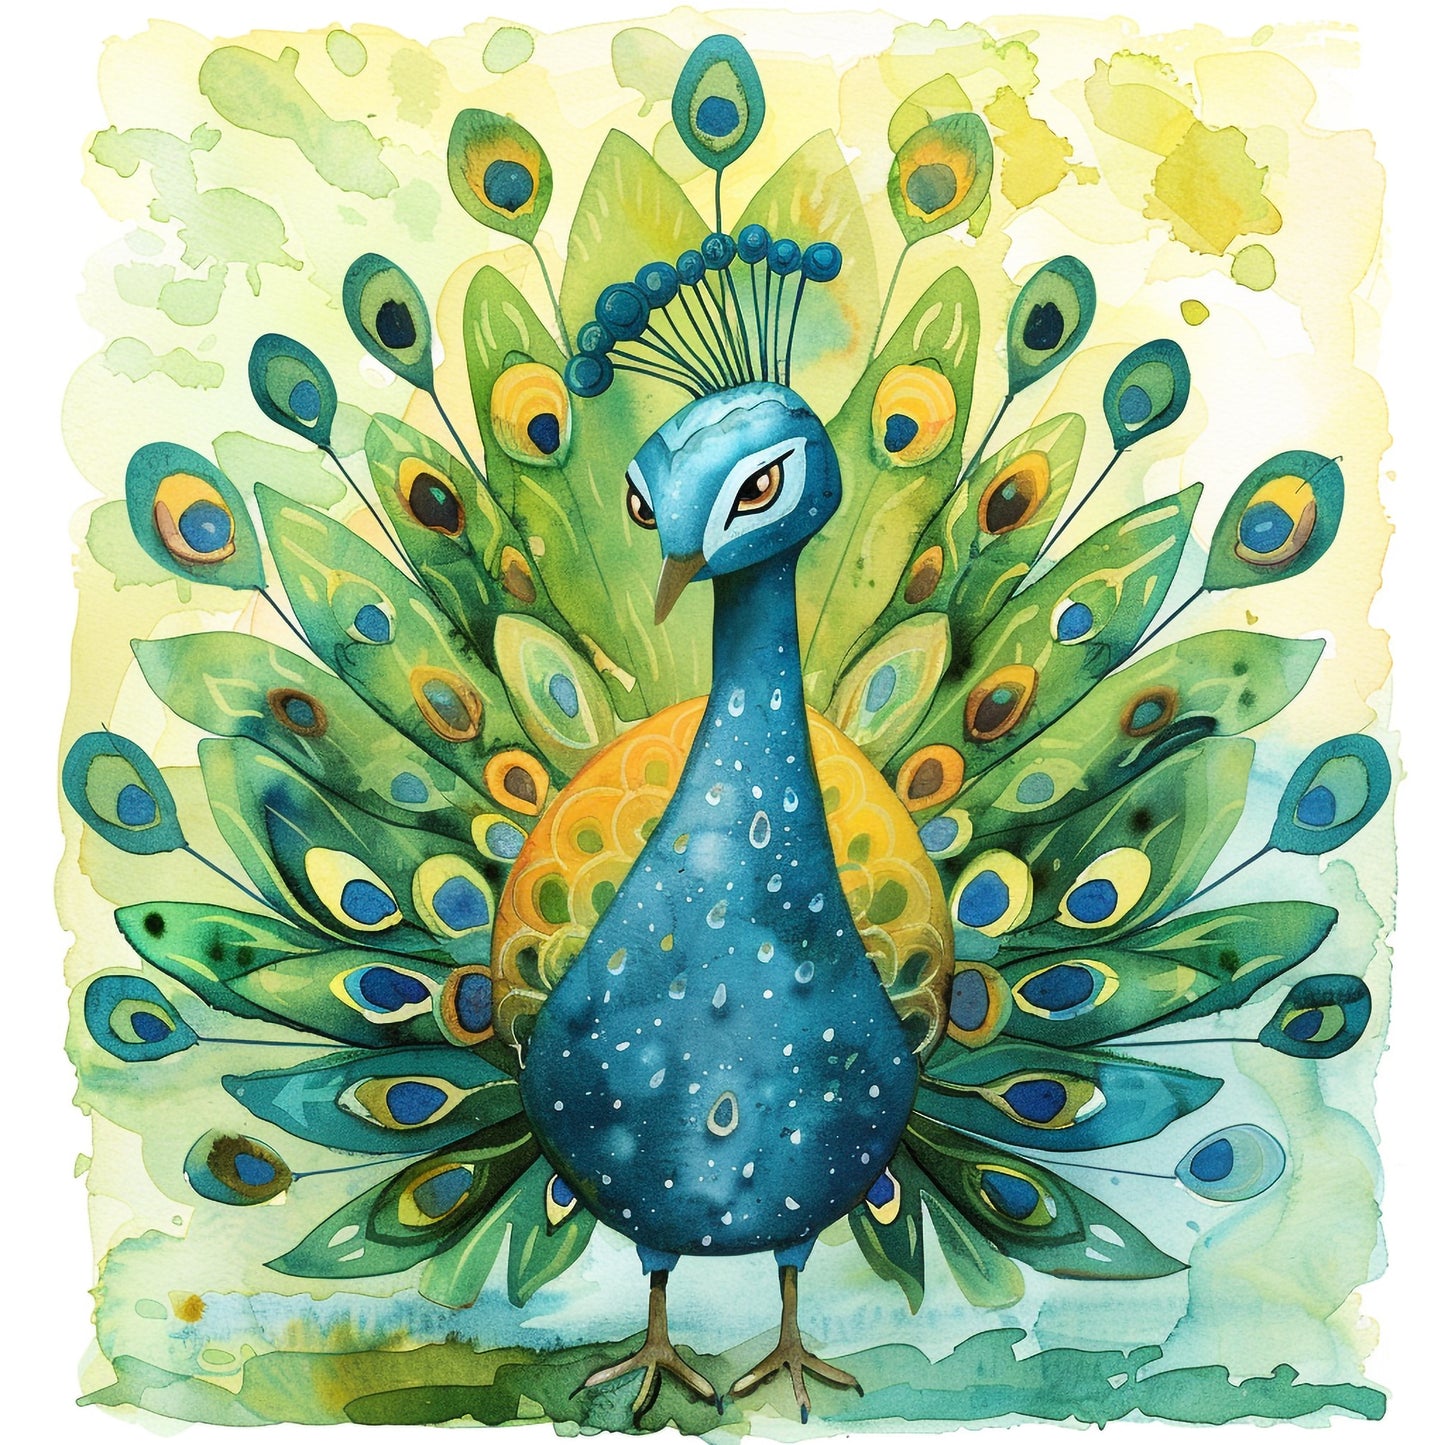 Colorful Watercolor Peacock with Open Feathers Illustration